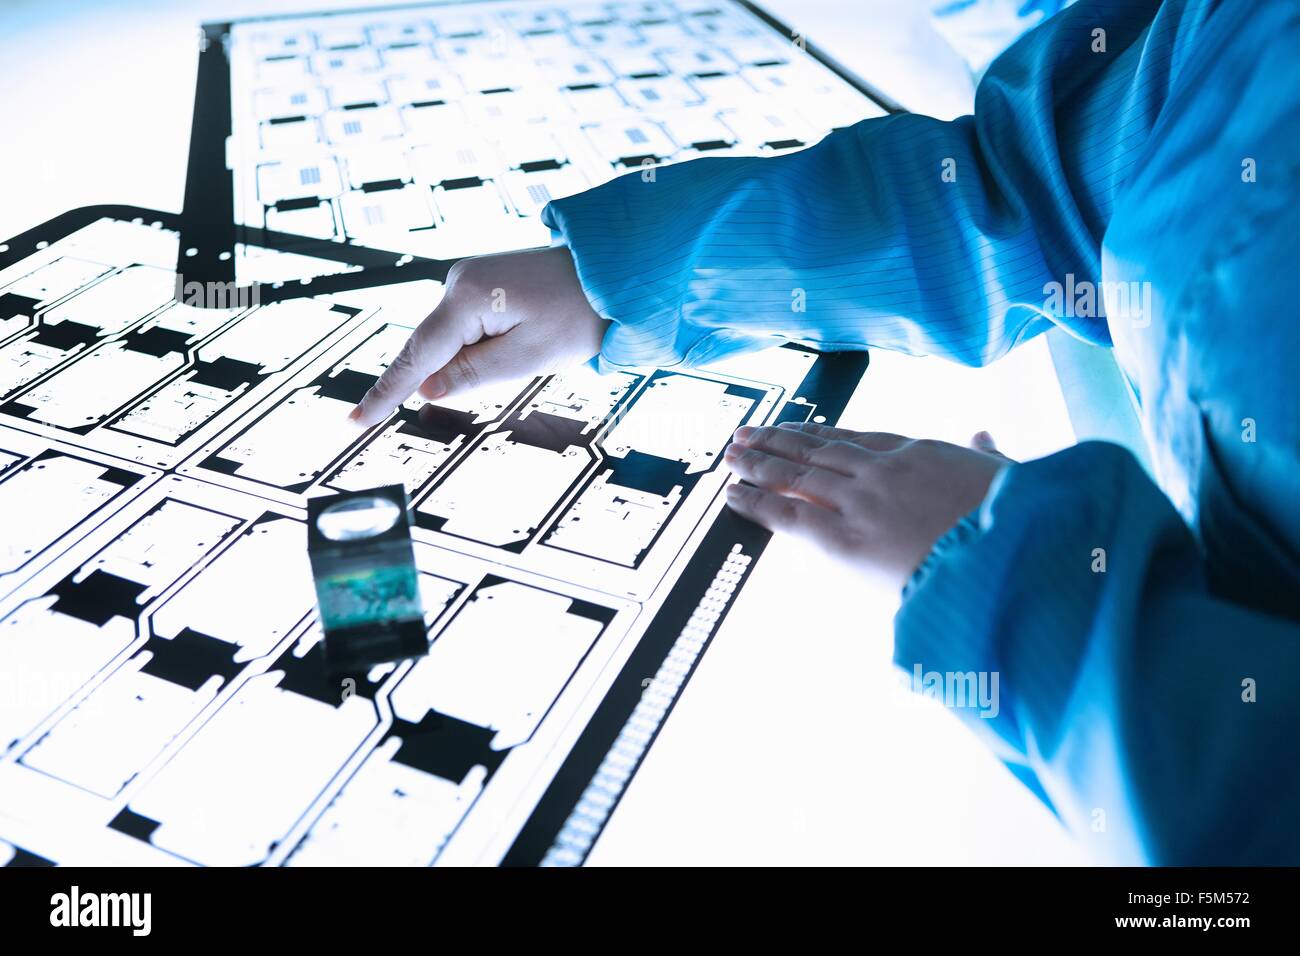 Hands of female worker inspecting flex circuit on lightbox in flexible electronics factory clean room Stock Photo